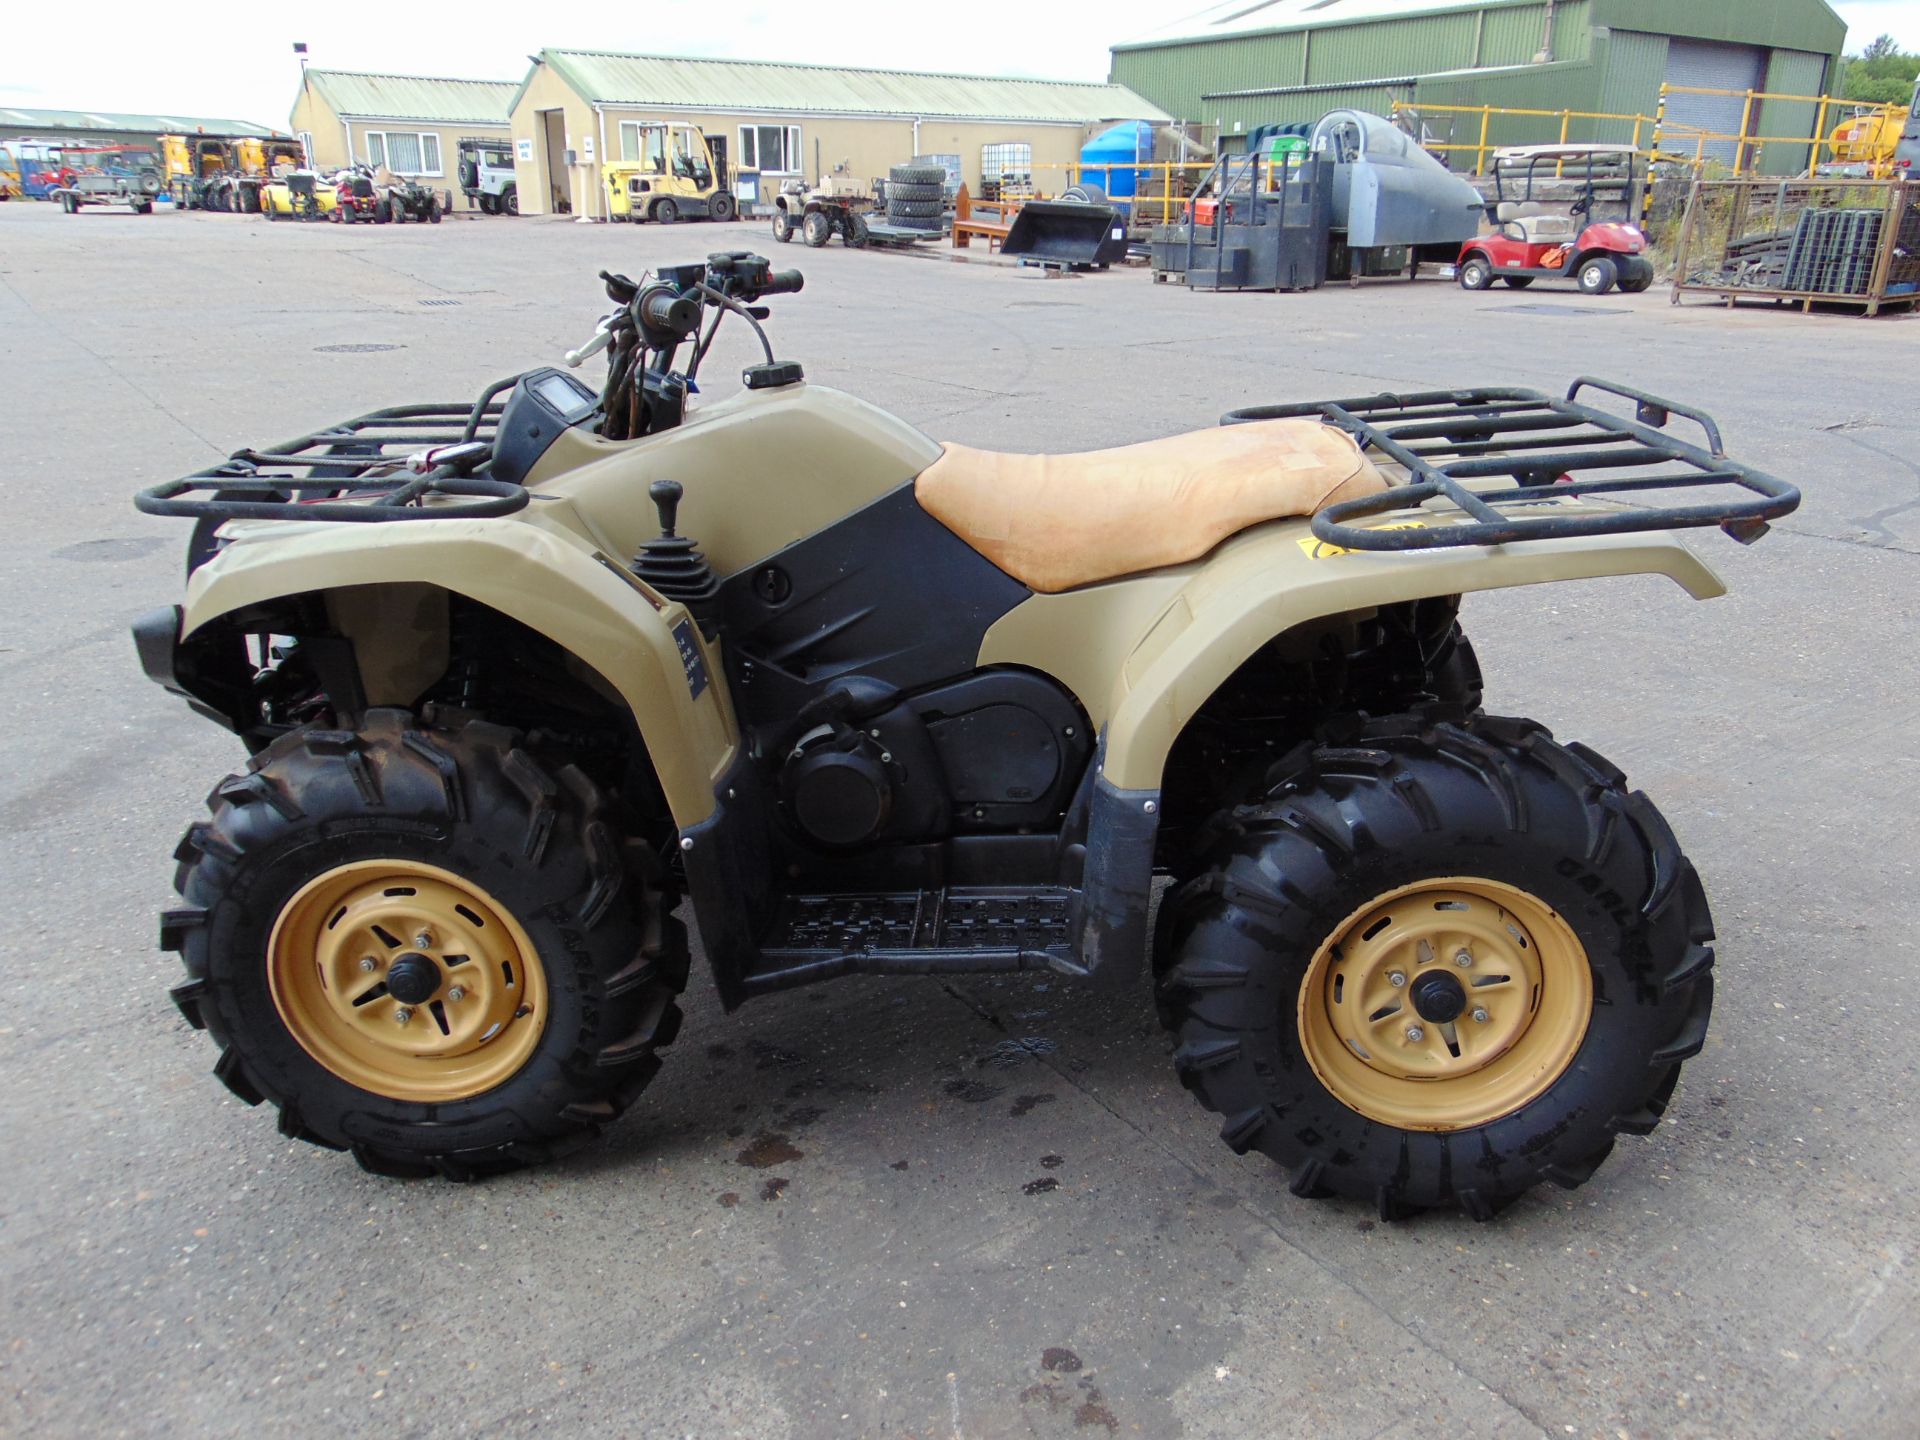 Military Specification Yamaha Grizzly 450 4 x 4 ATV Quad Bike ONLY 213 HOURS! - Image 4 of 18